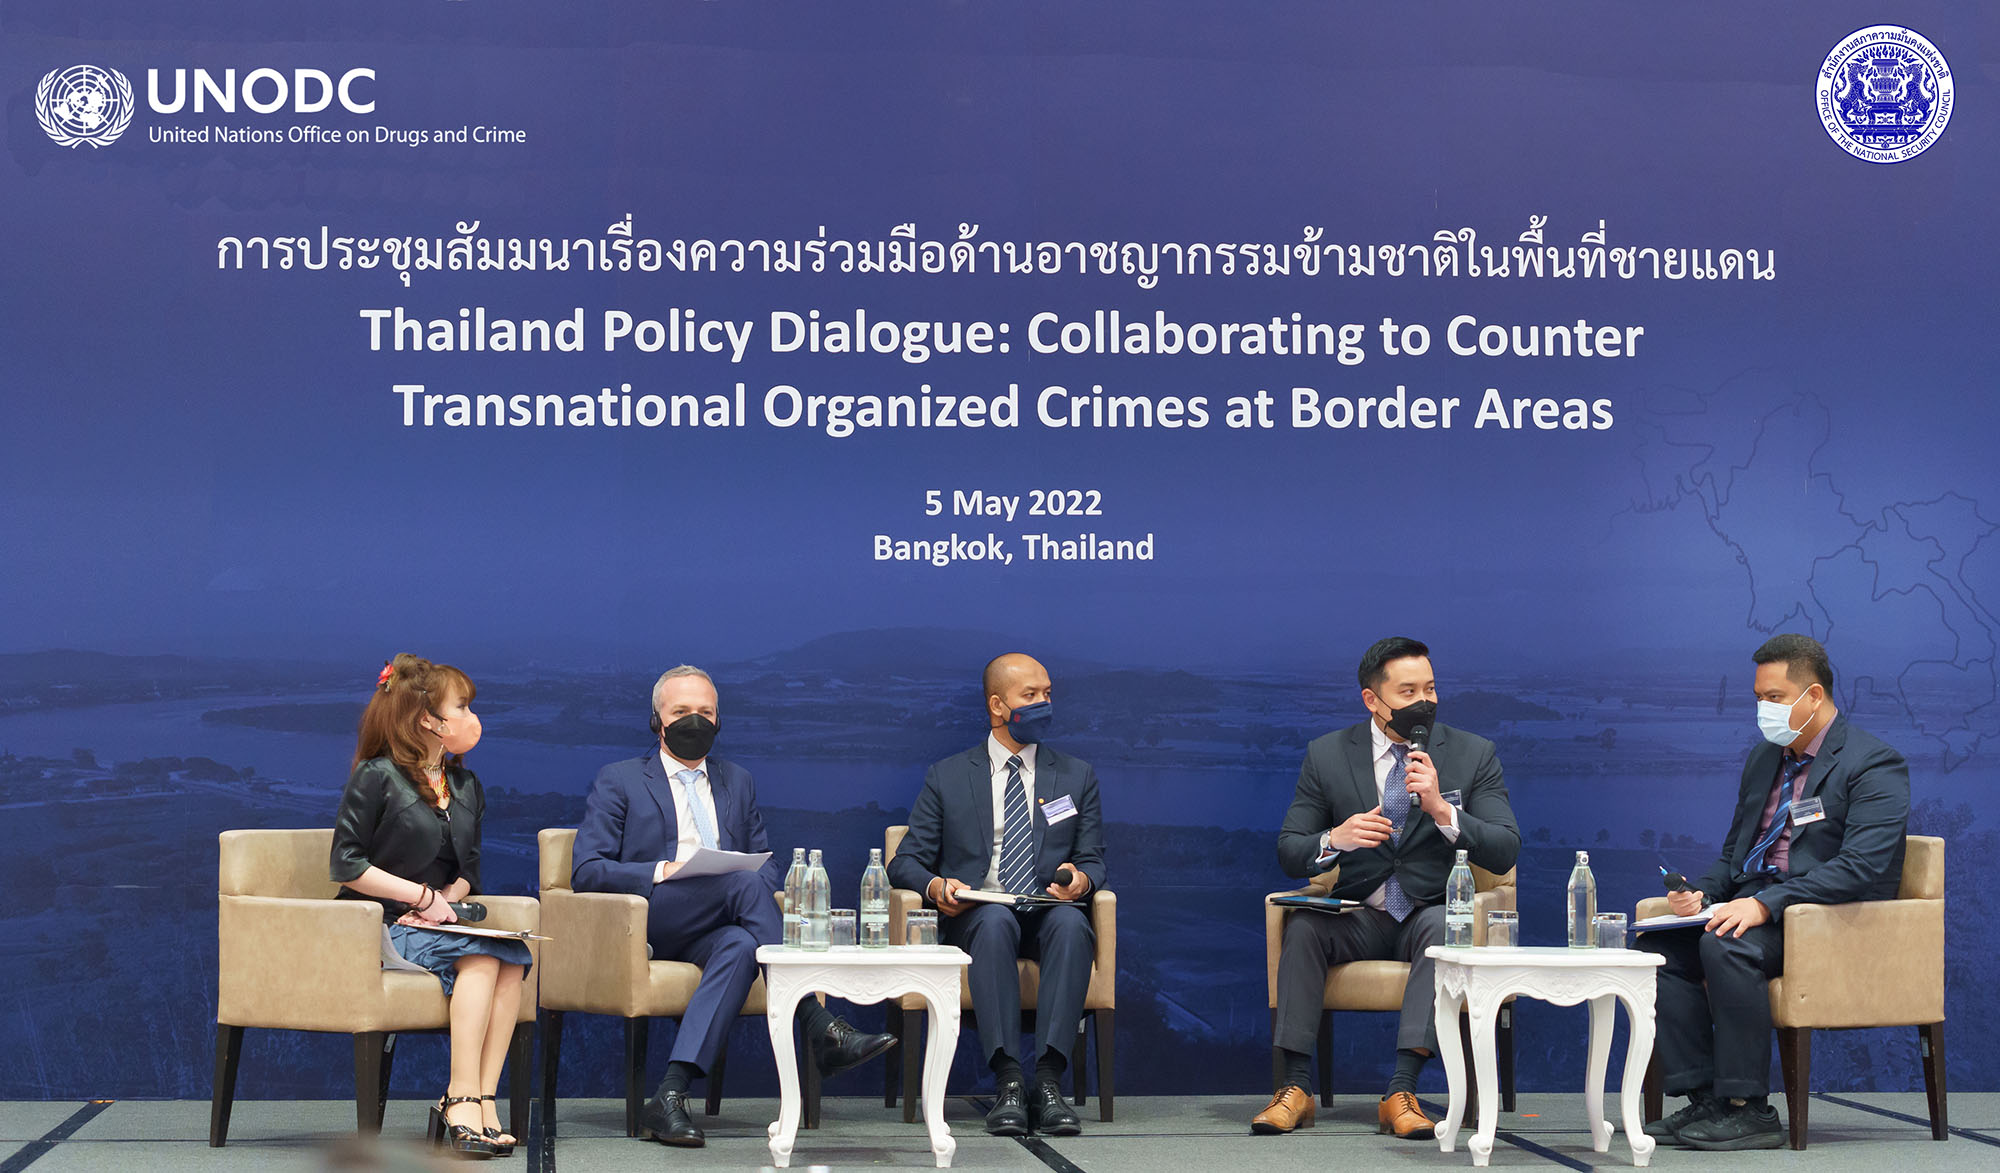 A panel discusses transnational environmental crime and inter-agency collaboration